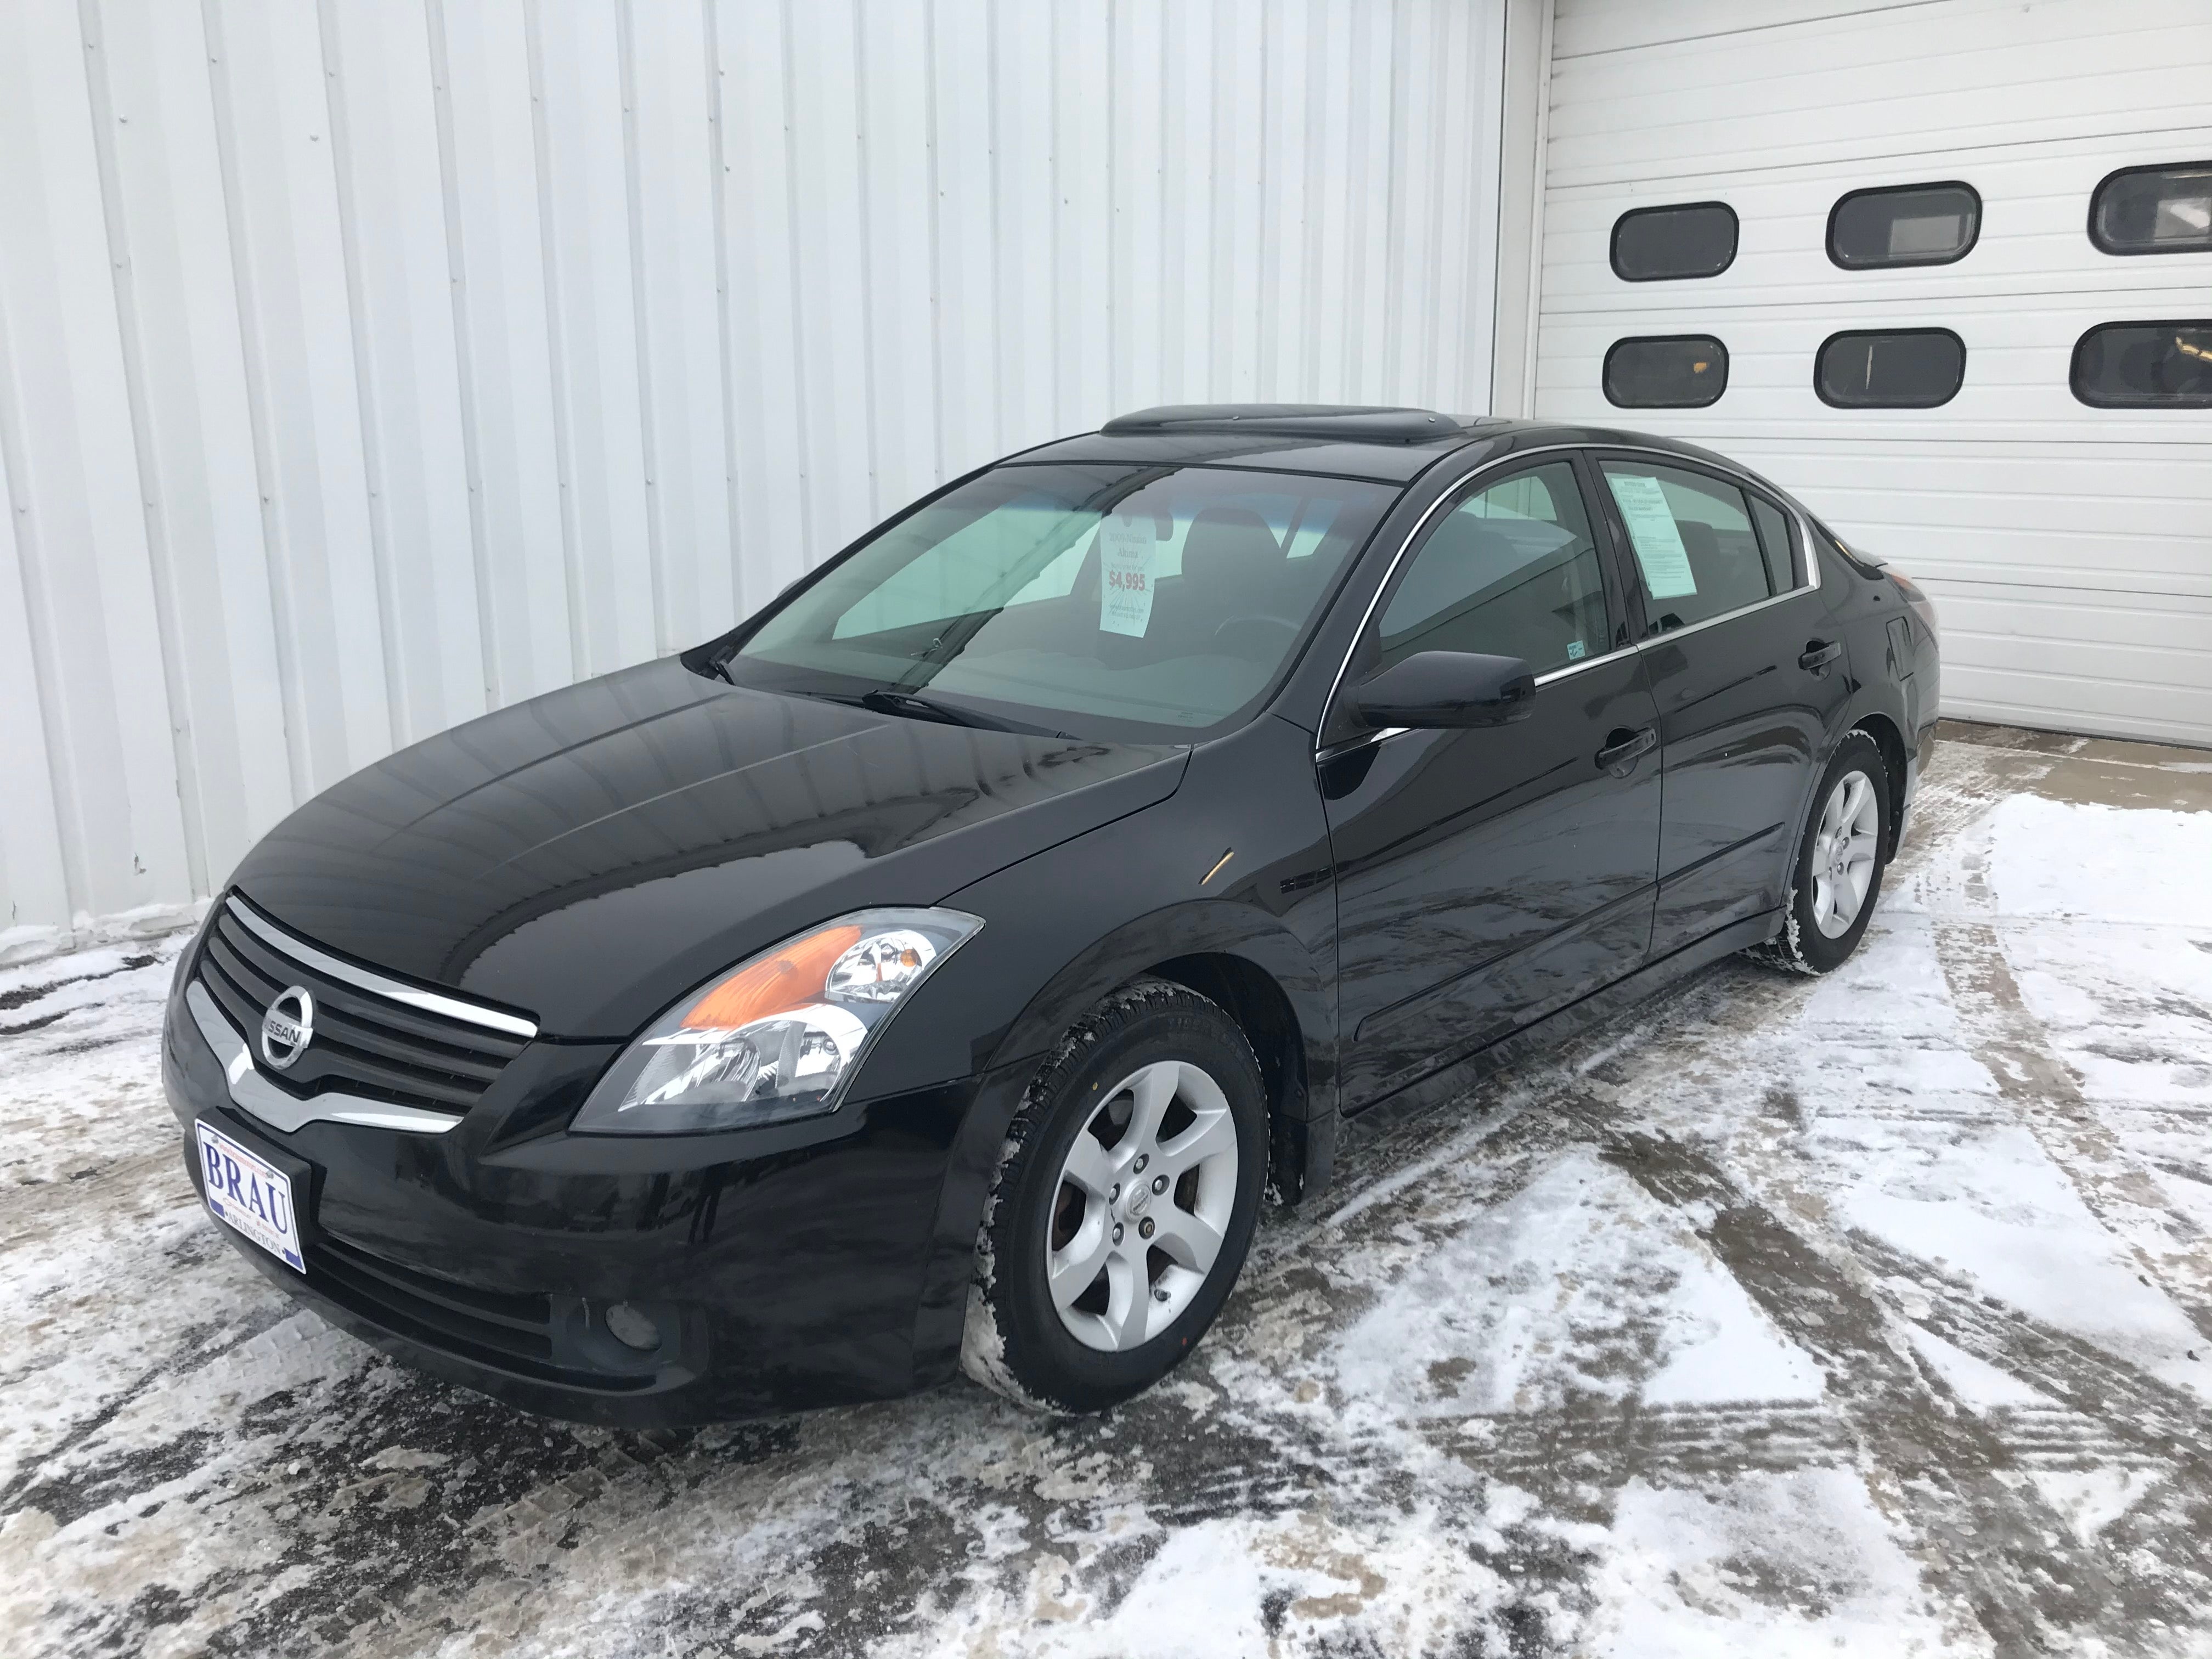 Used 2009 Nissan Altima S with VIN 1N4AL21E89N428695 for sale in Arlington, Minnesota